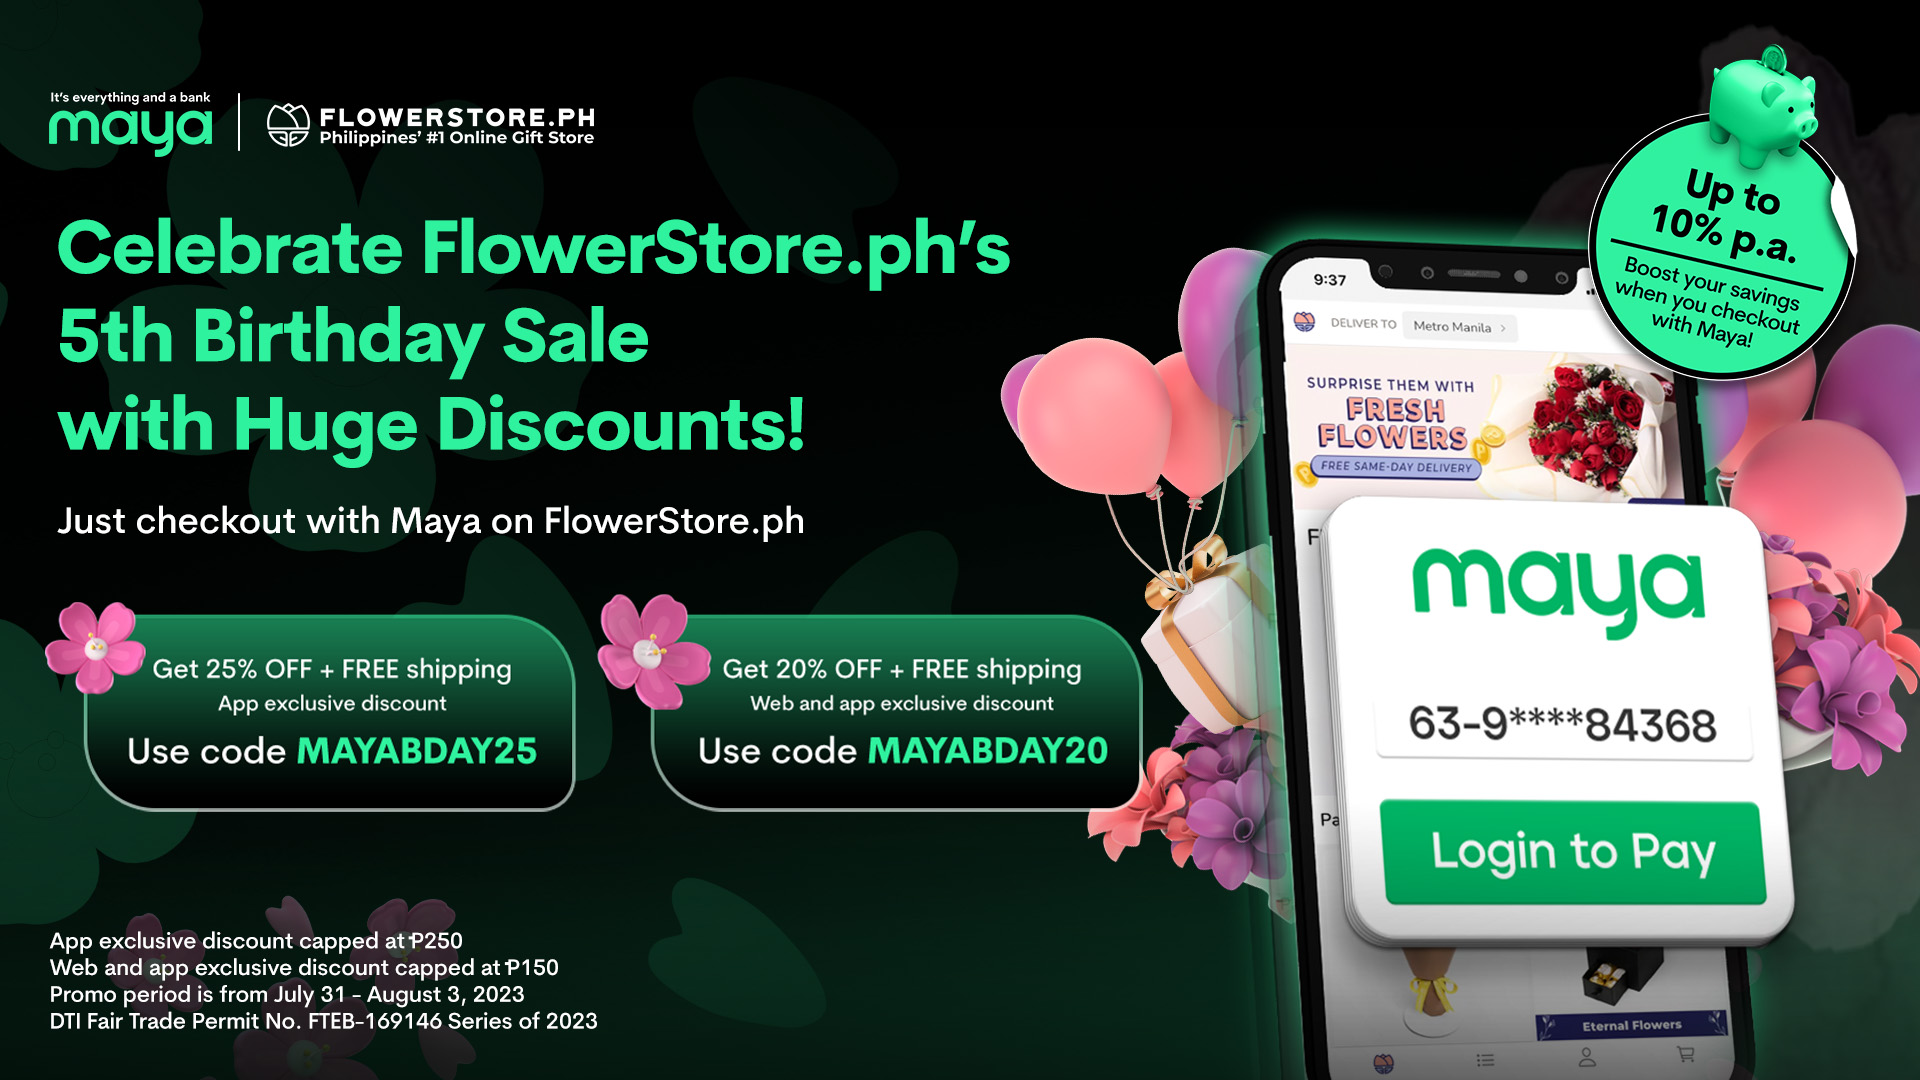 Big discount at 5th Birthday Sale with FlowerStore.ph!